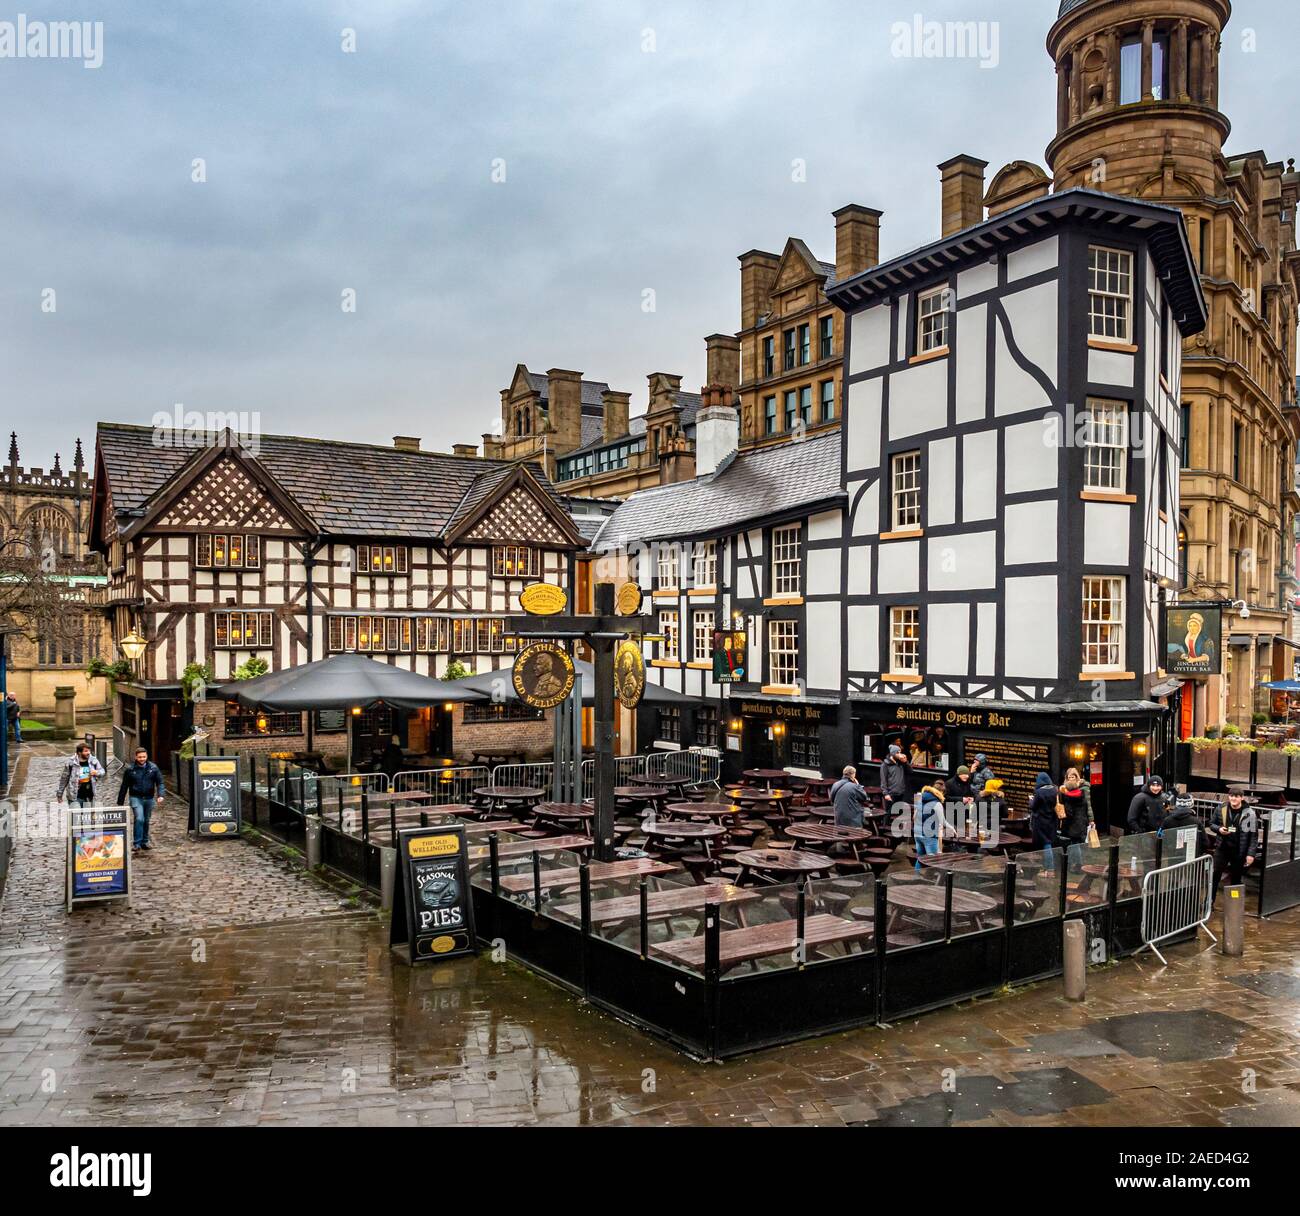 Shambles Square in Manchester, England, created in 1999 around the rebuilt Old Wellington Inn and Sinclair's Oyster Bar next to The Mitre Hotel. Stock Photo